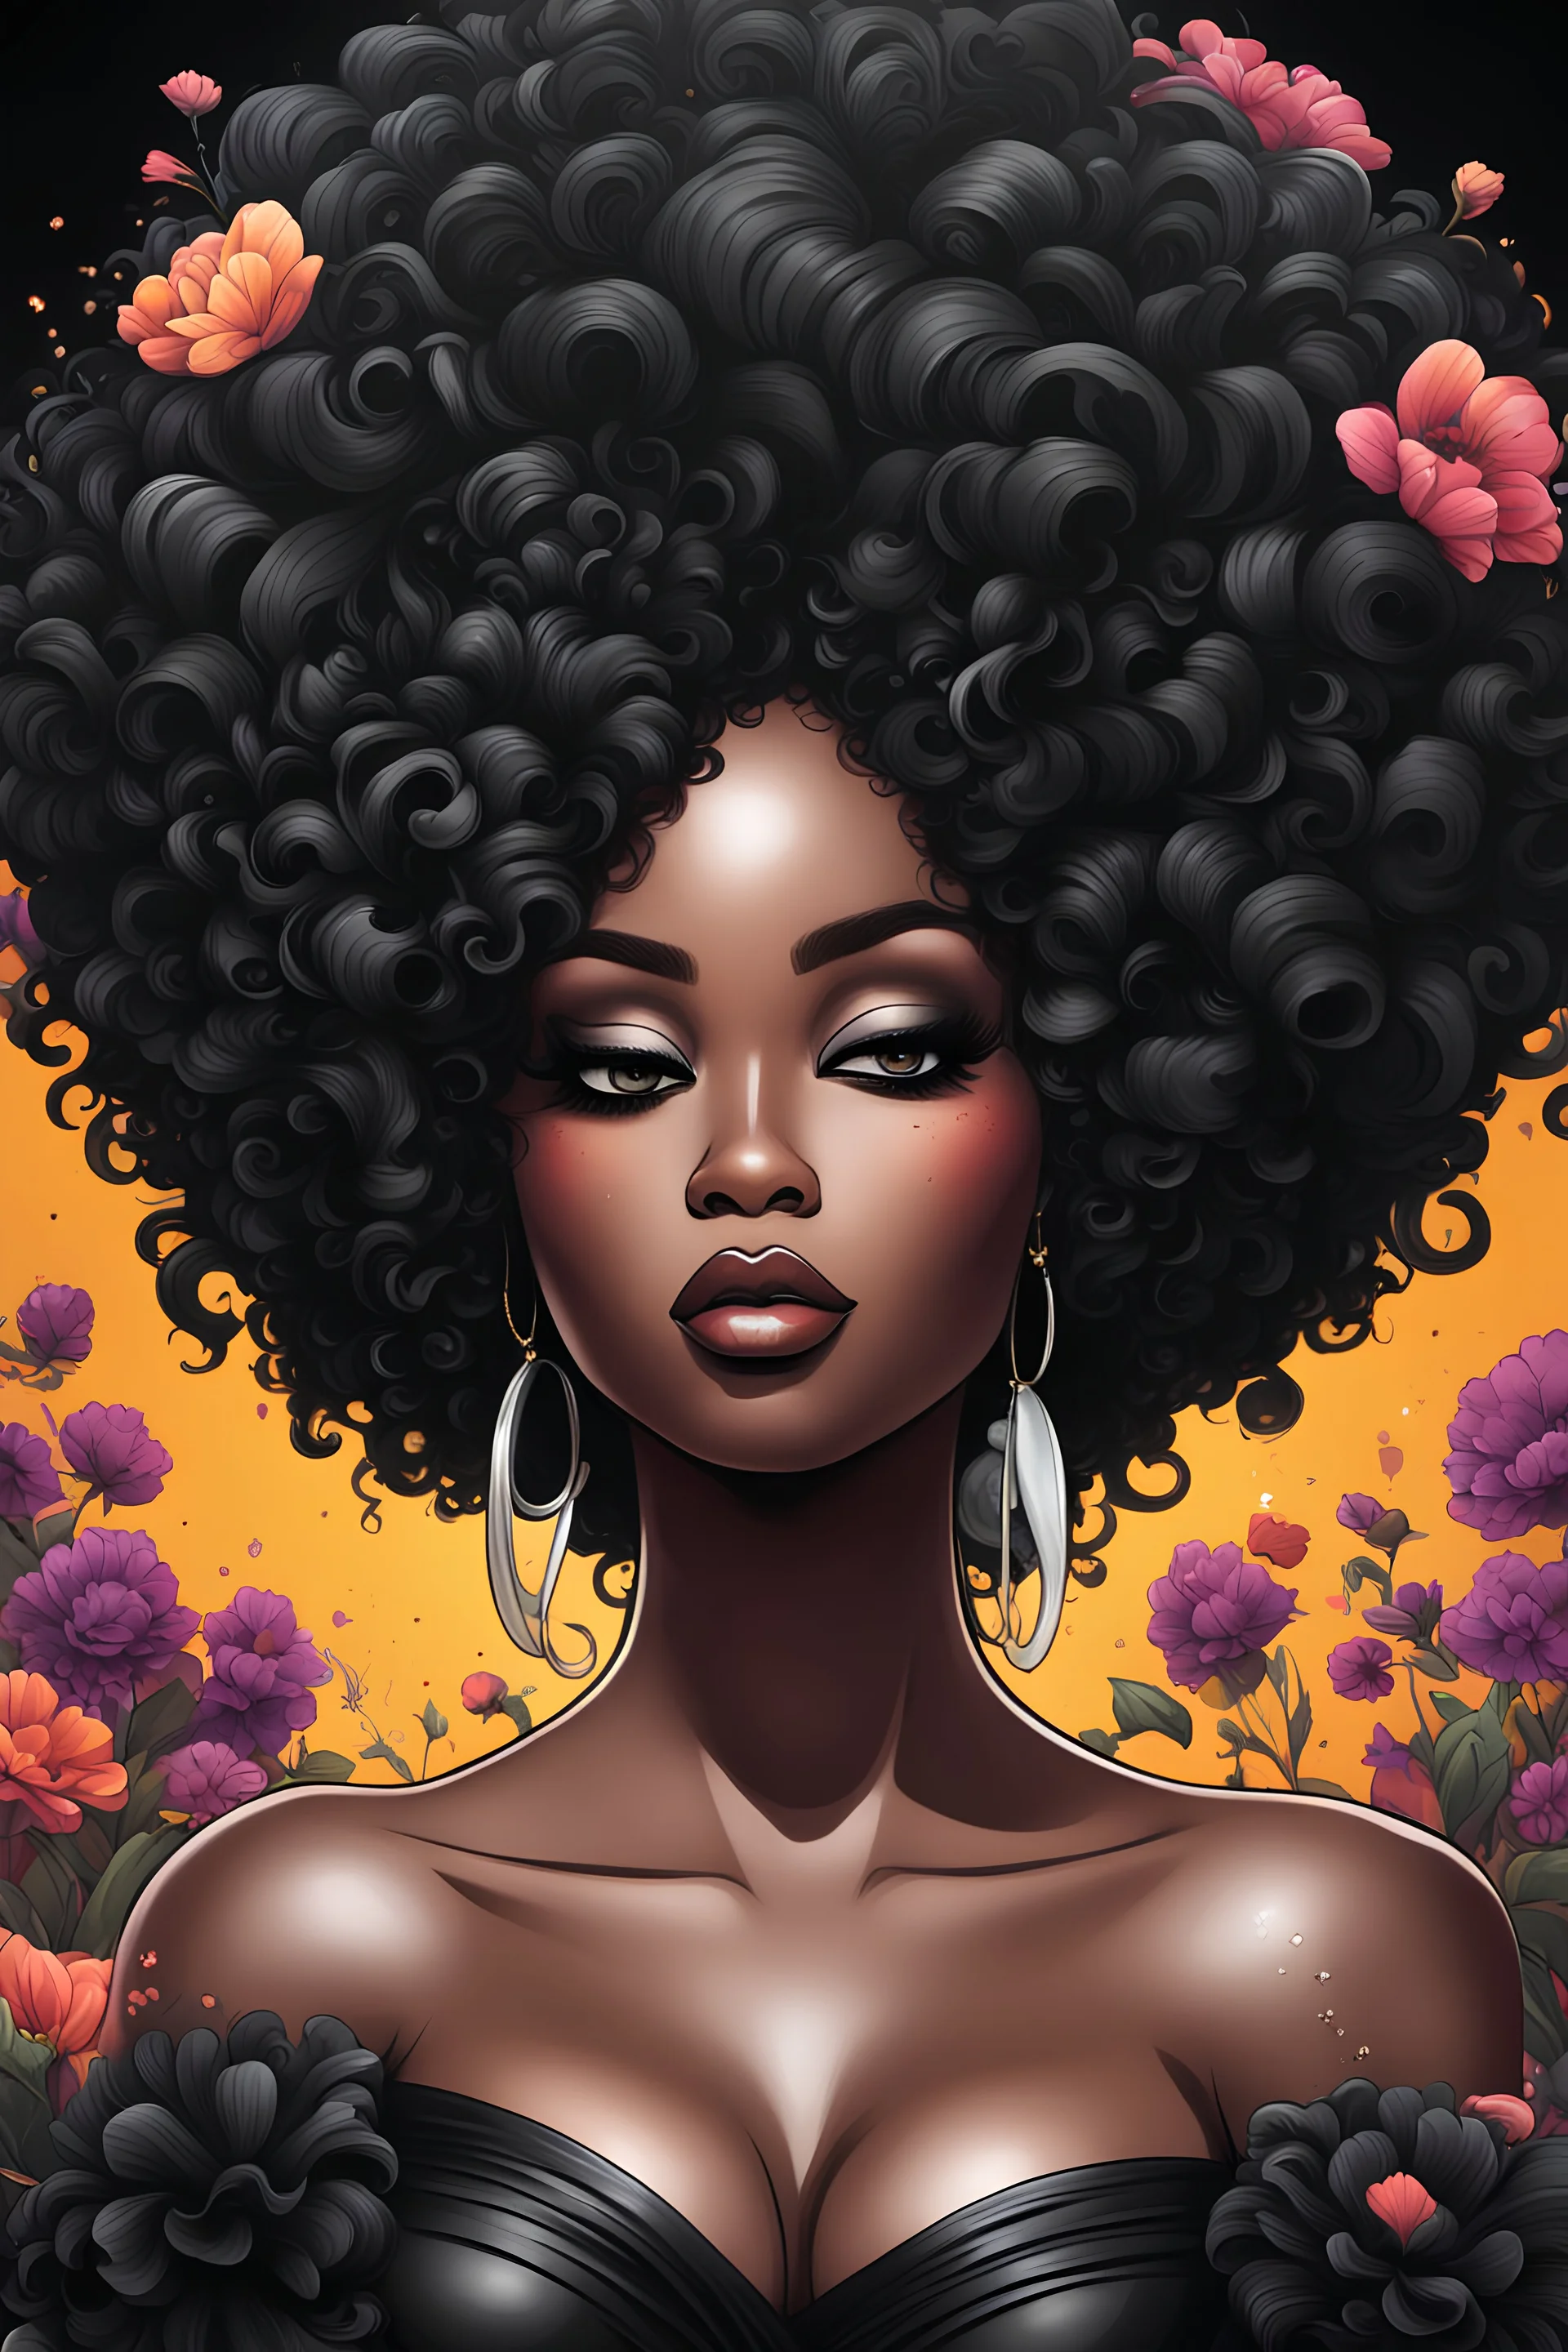 Create an graffiti cartoon art image of a curvy black female wearing a black off the shoulder blouse and she is looking down with Prominent makeup. Highly detailed tightly curly black afro. Background of large black flowers surrounding her